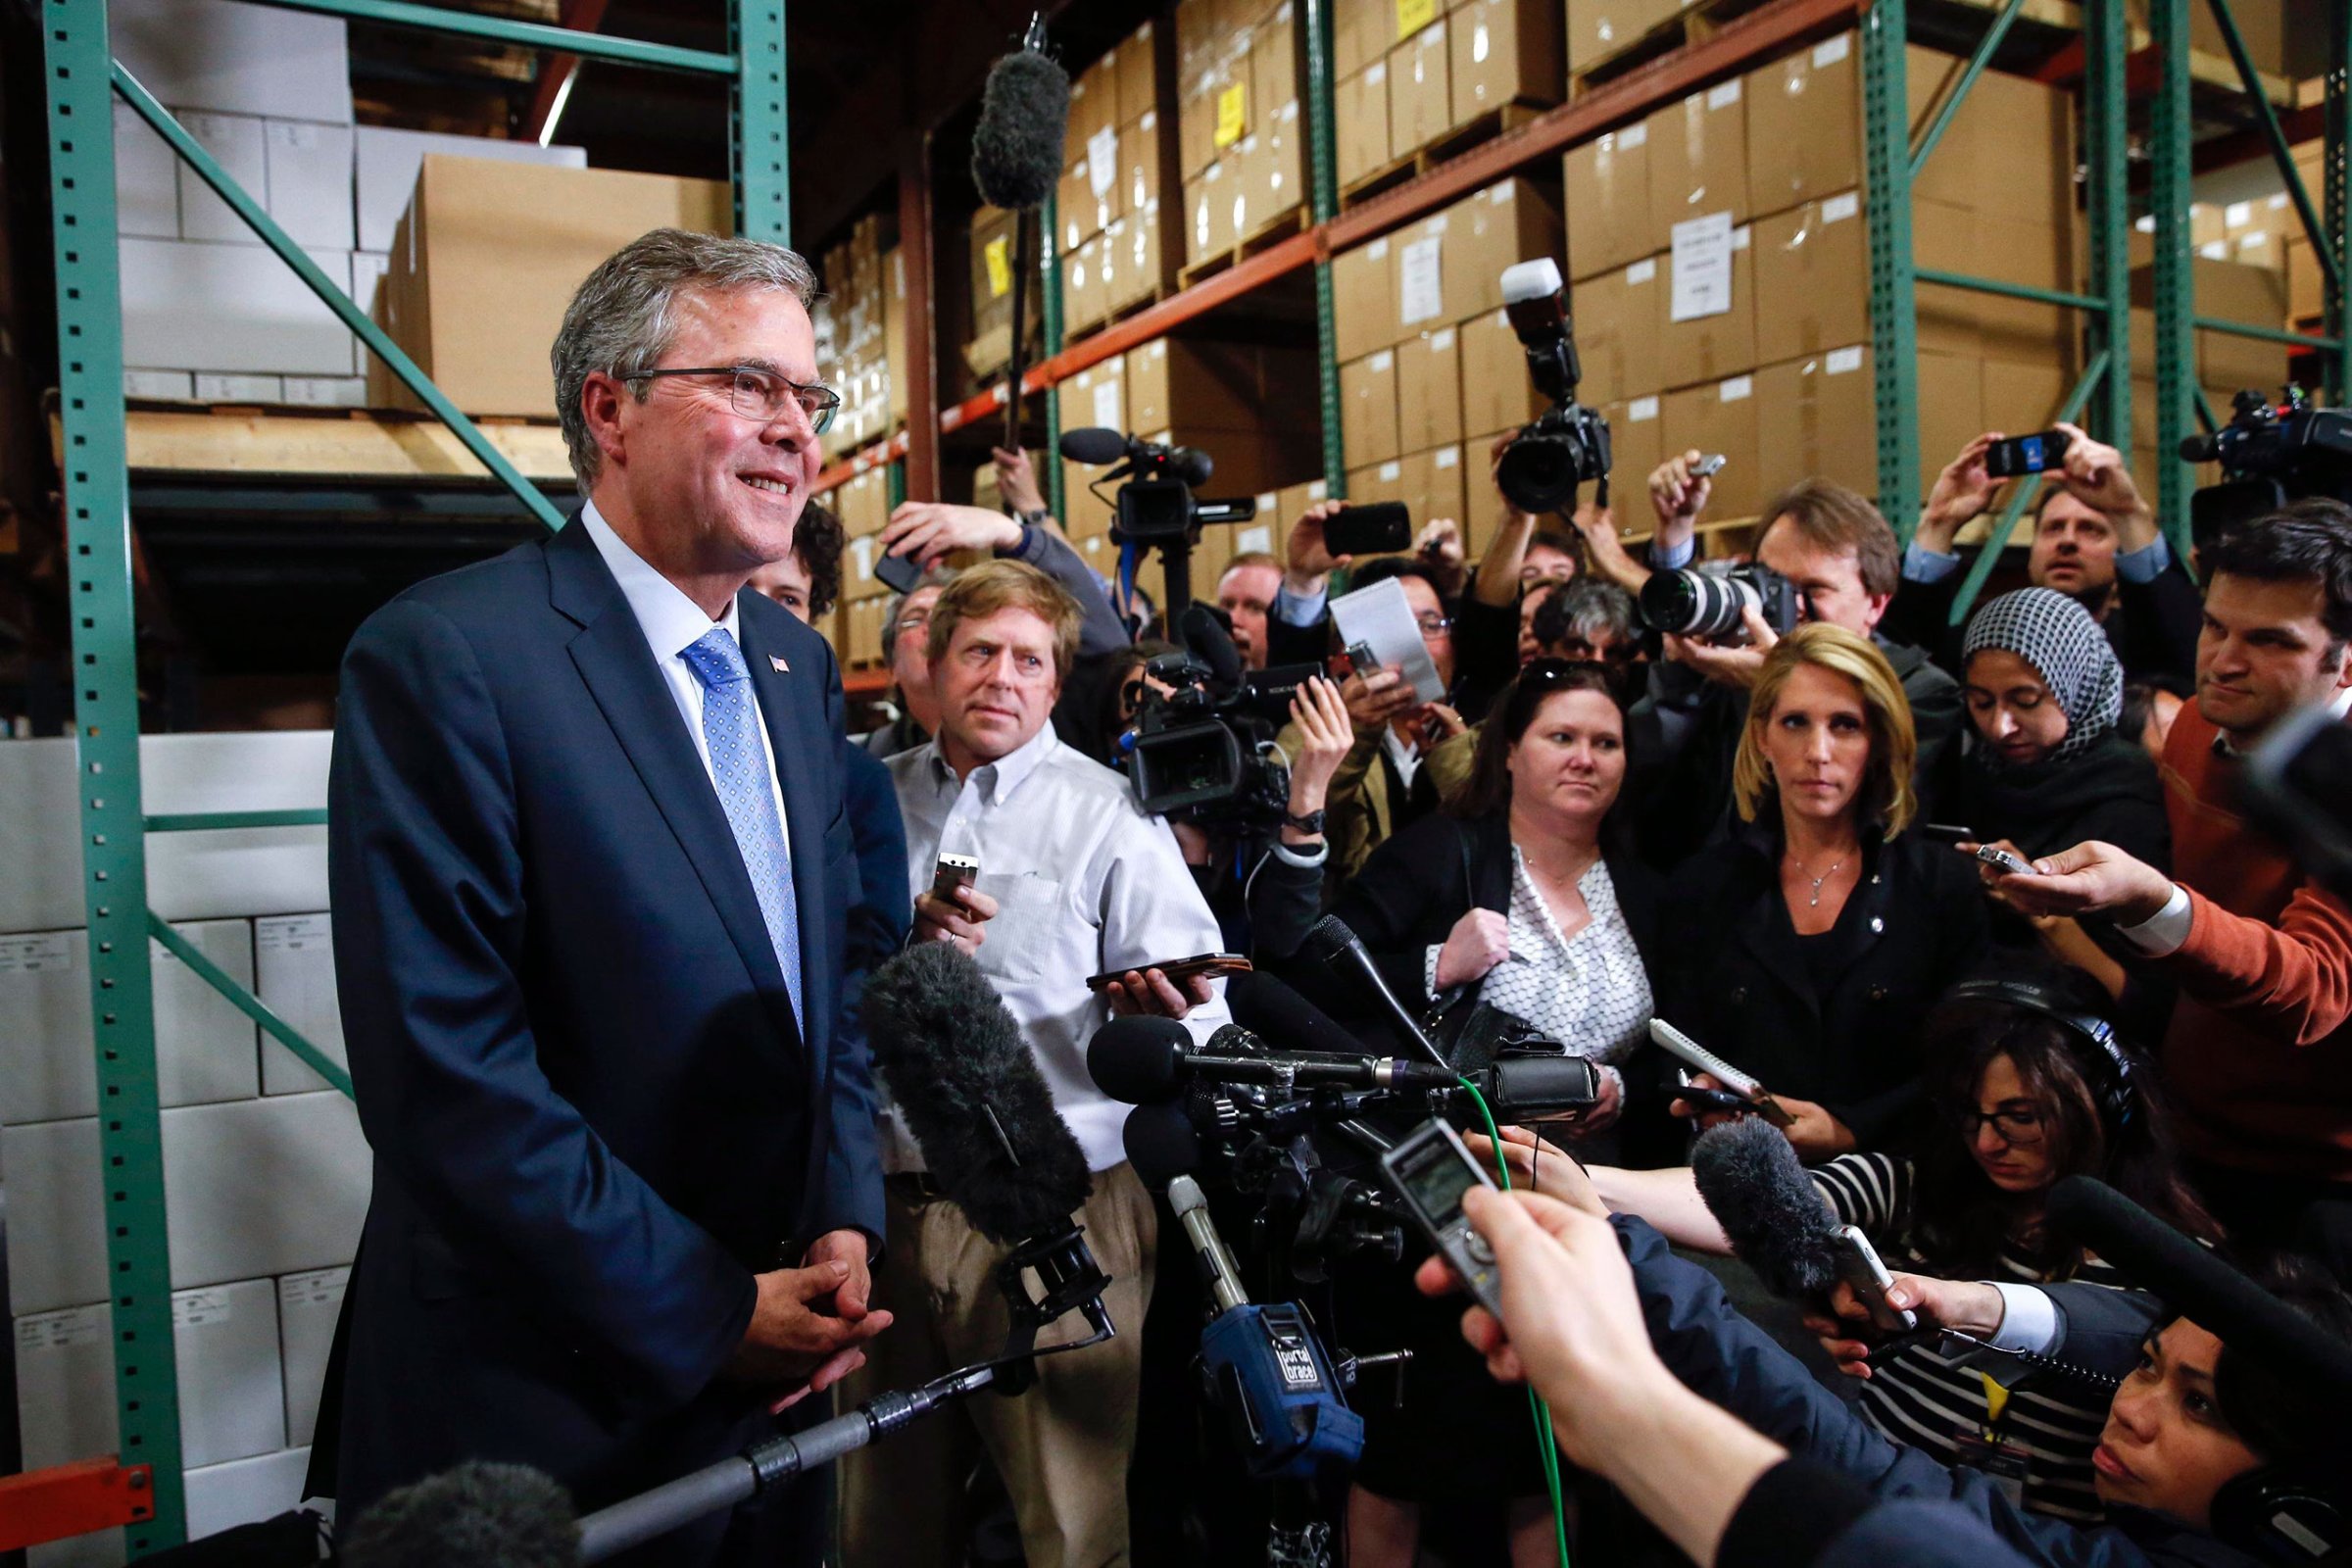 Former Florida Governor Jeb Bush speaks to the media after visiting Integra Biosciences during a campaign stop in Hudson, New Hampshire